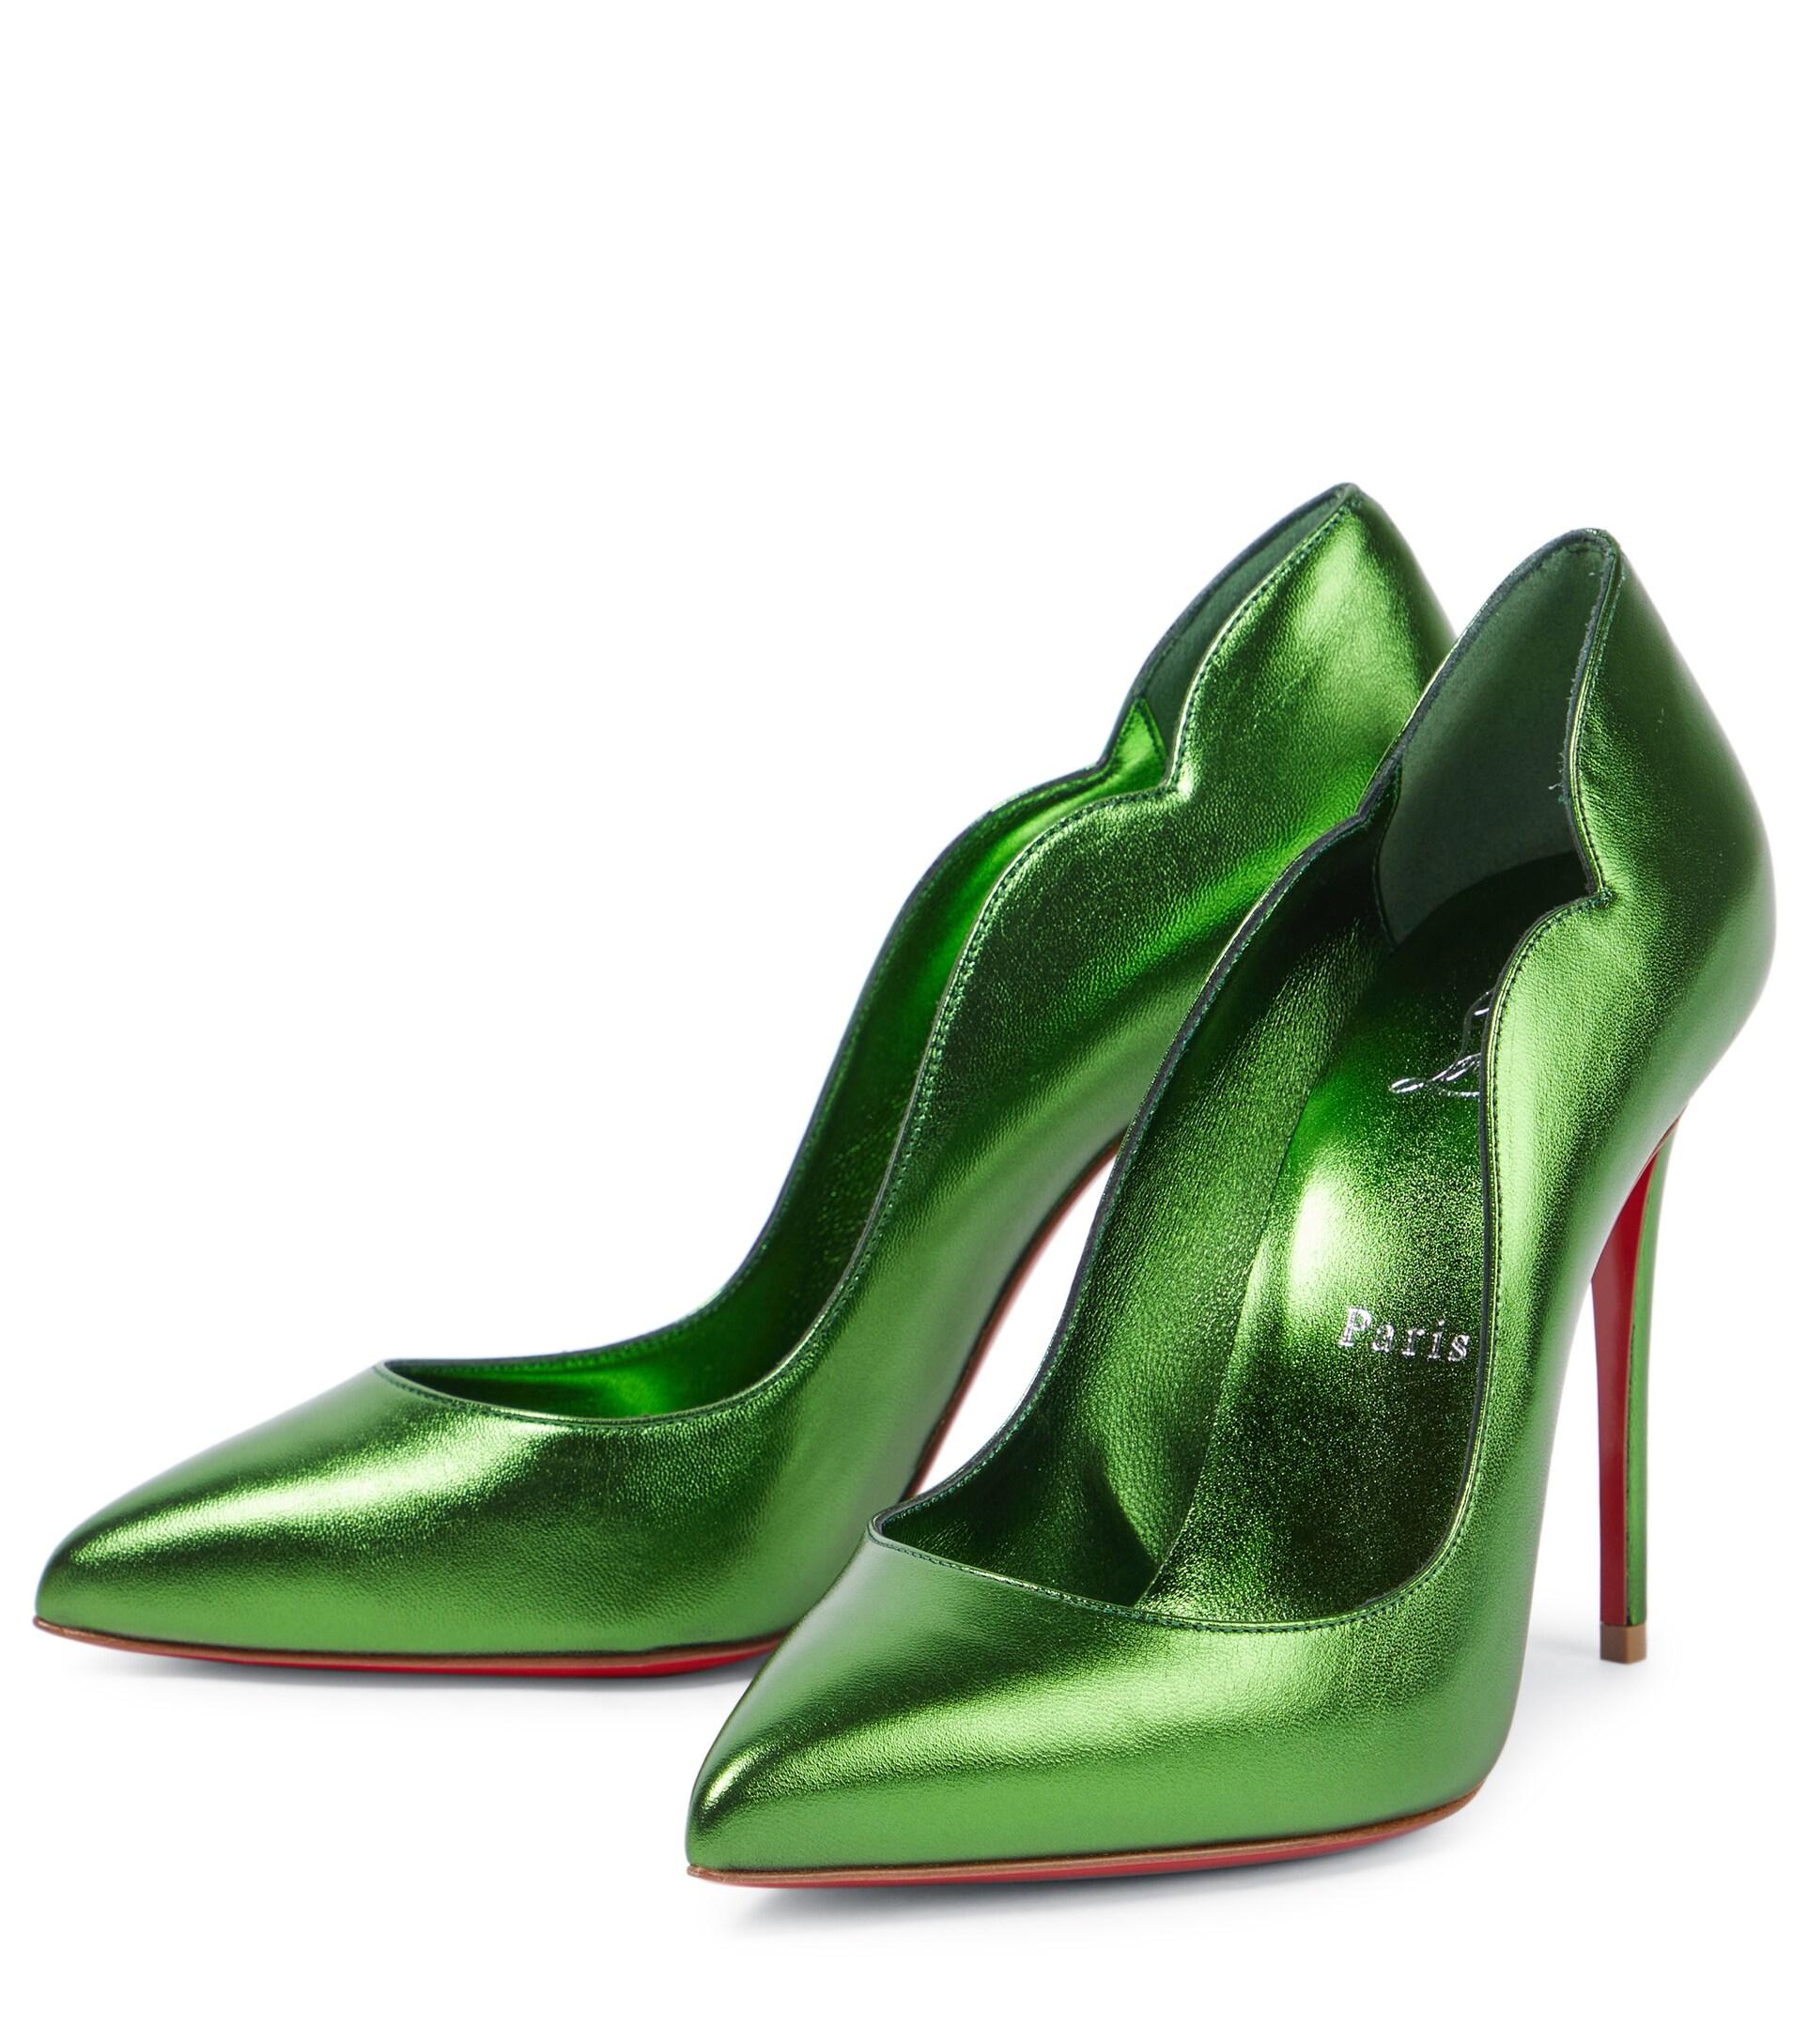 Christian Louboutin Hot Chick 100 Metallic Leather Pumps in Green | Lyst